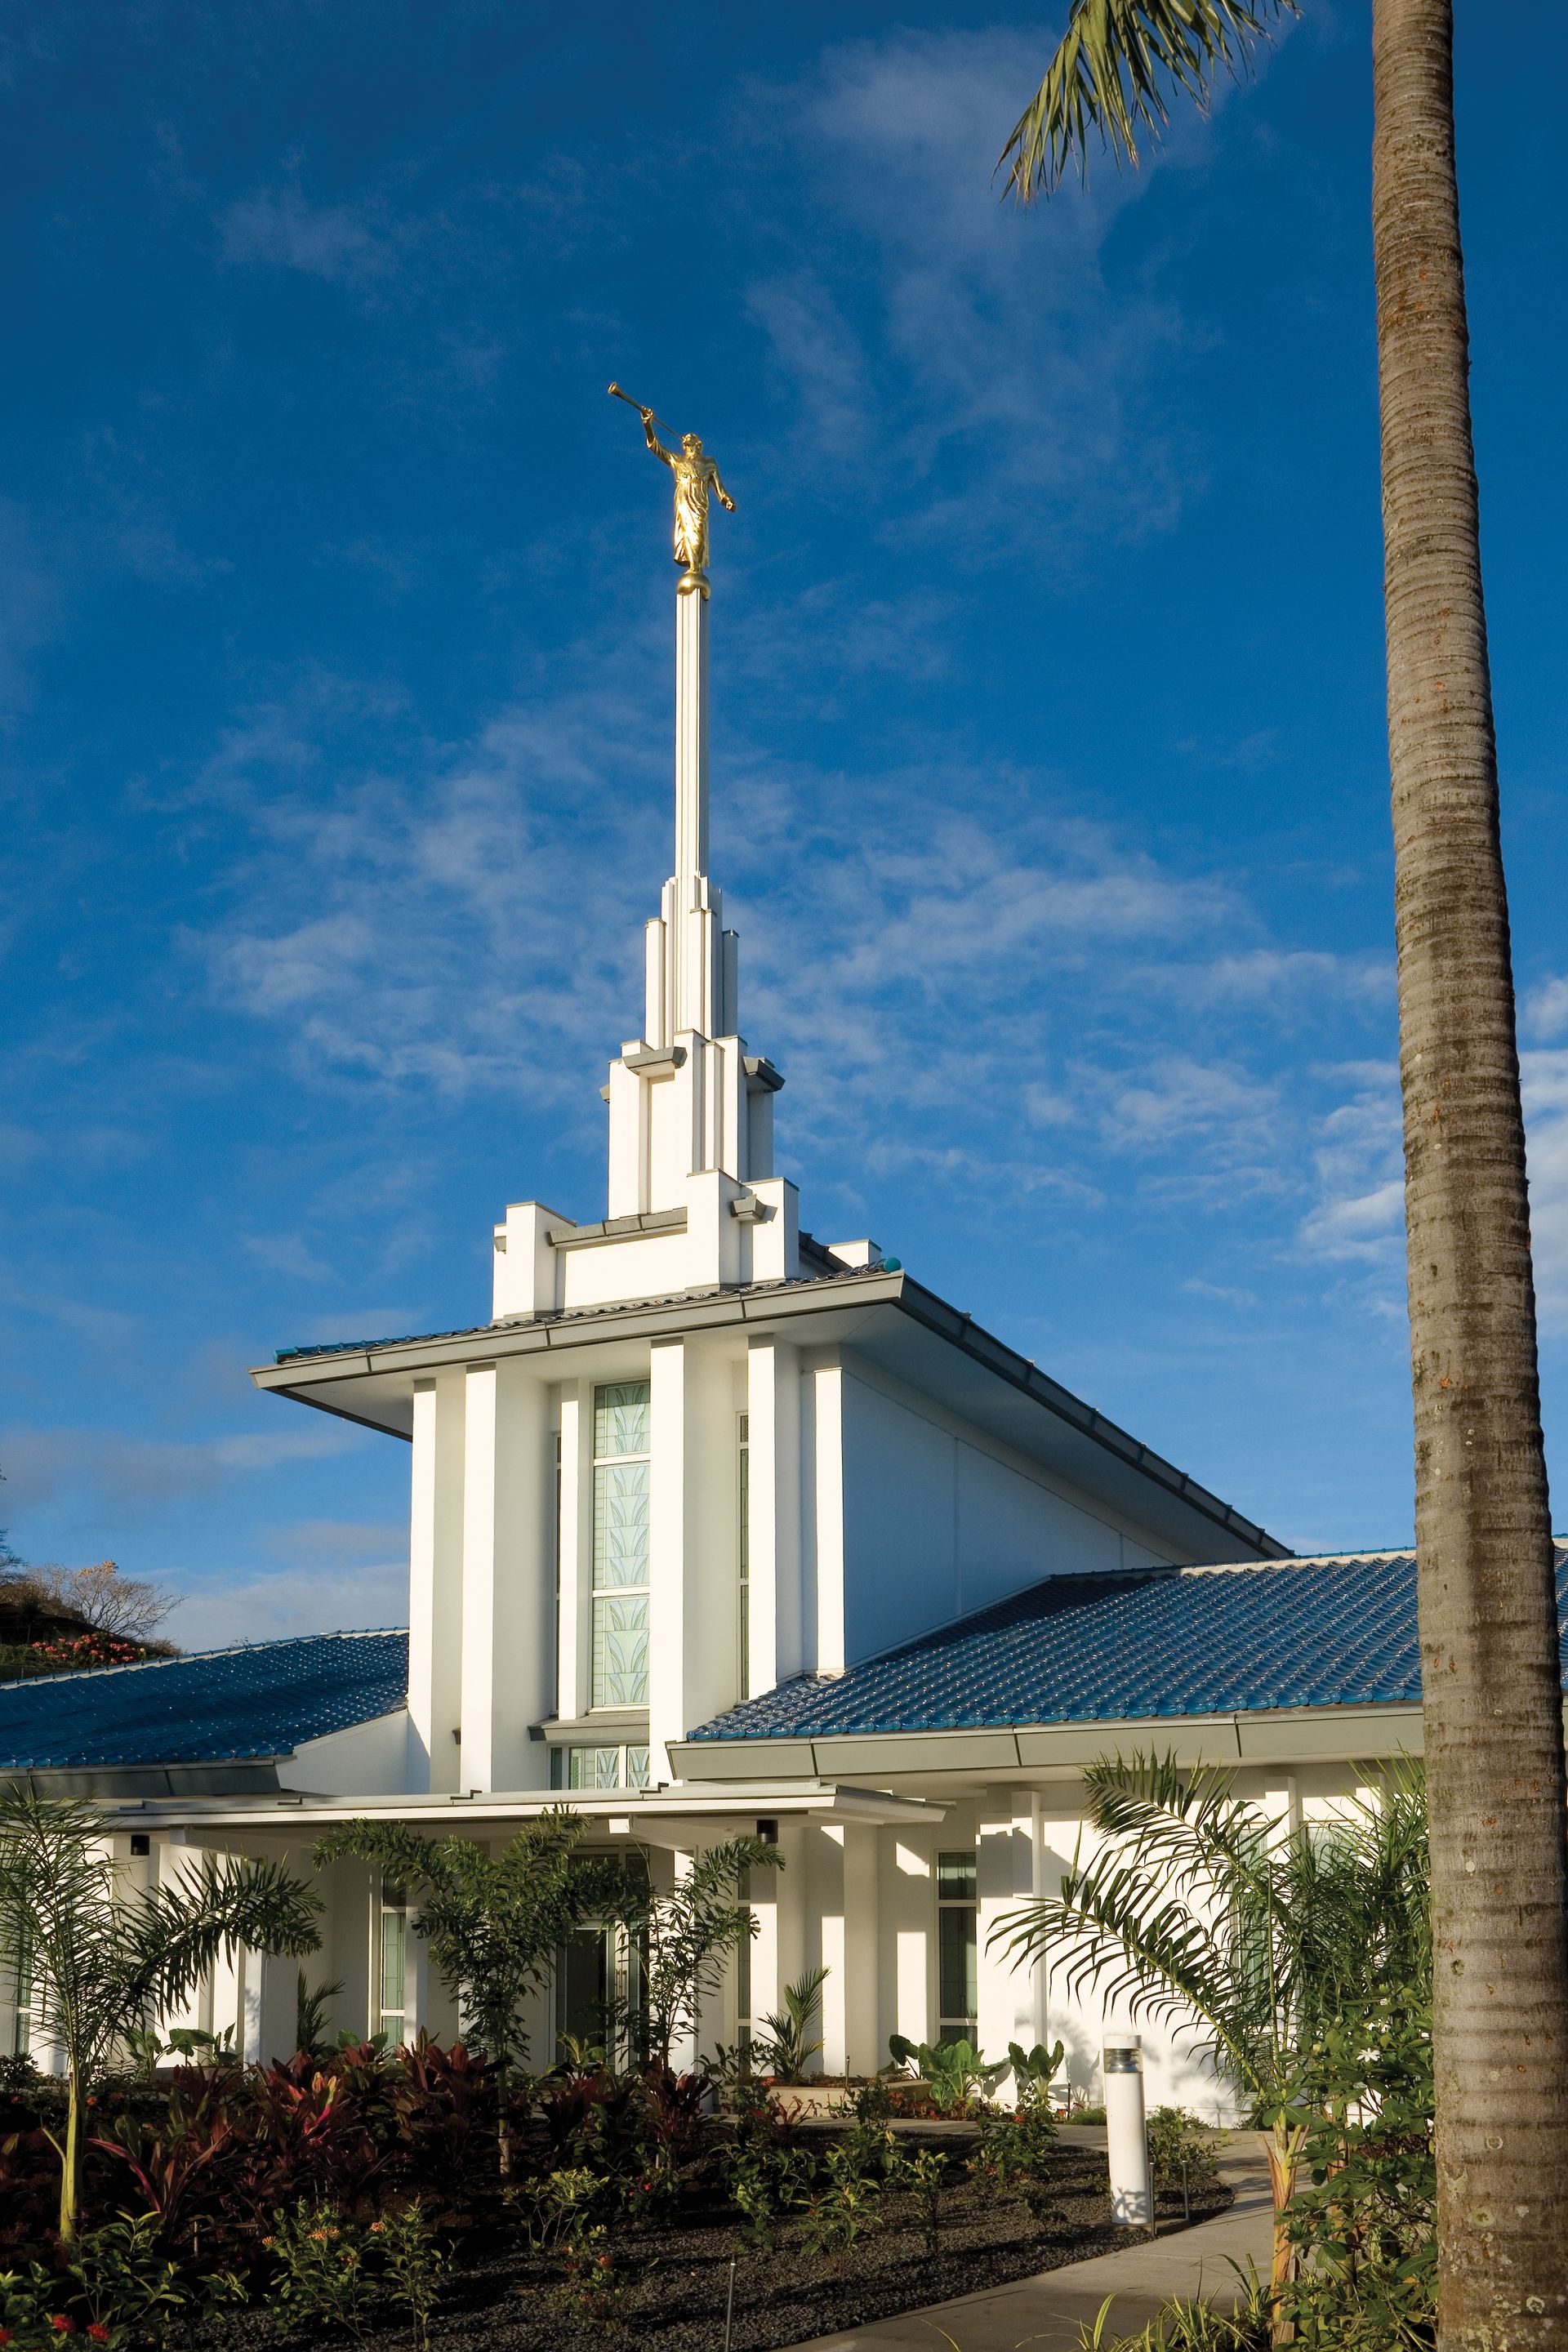 The Papeete Tahiti Temple, including the entrance and exterior of the temple.